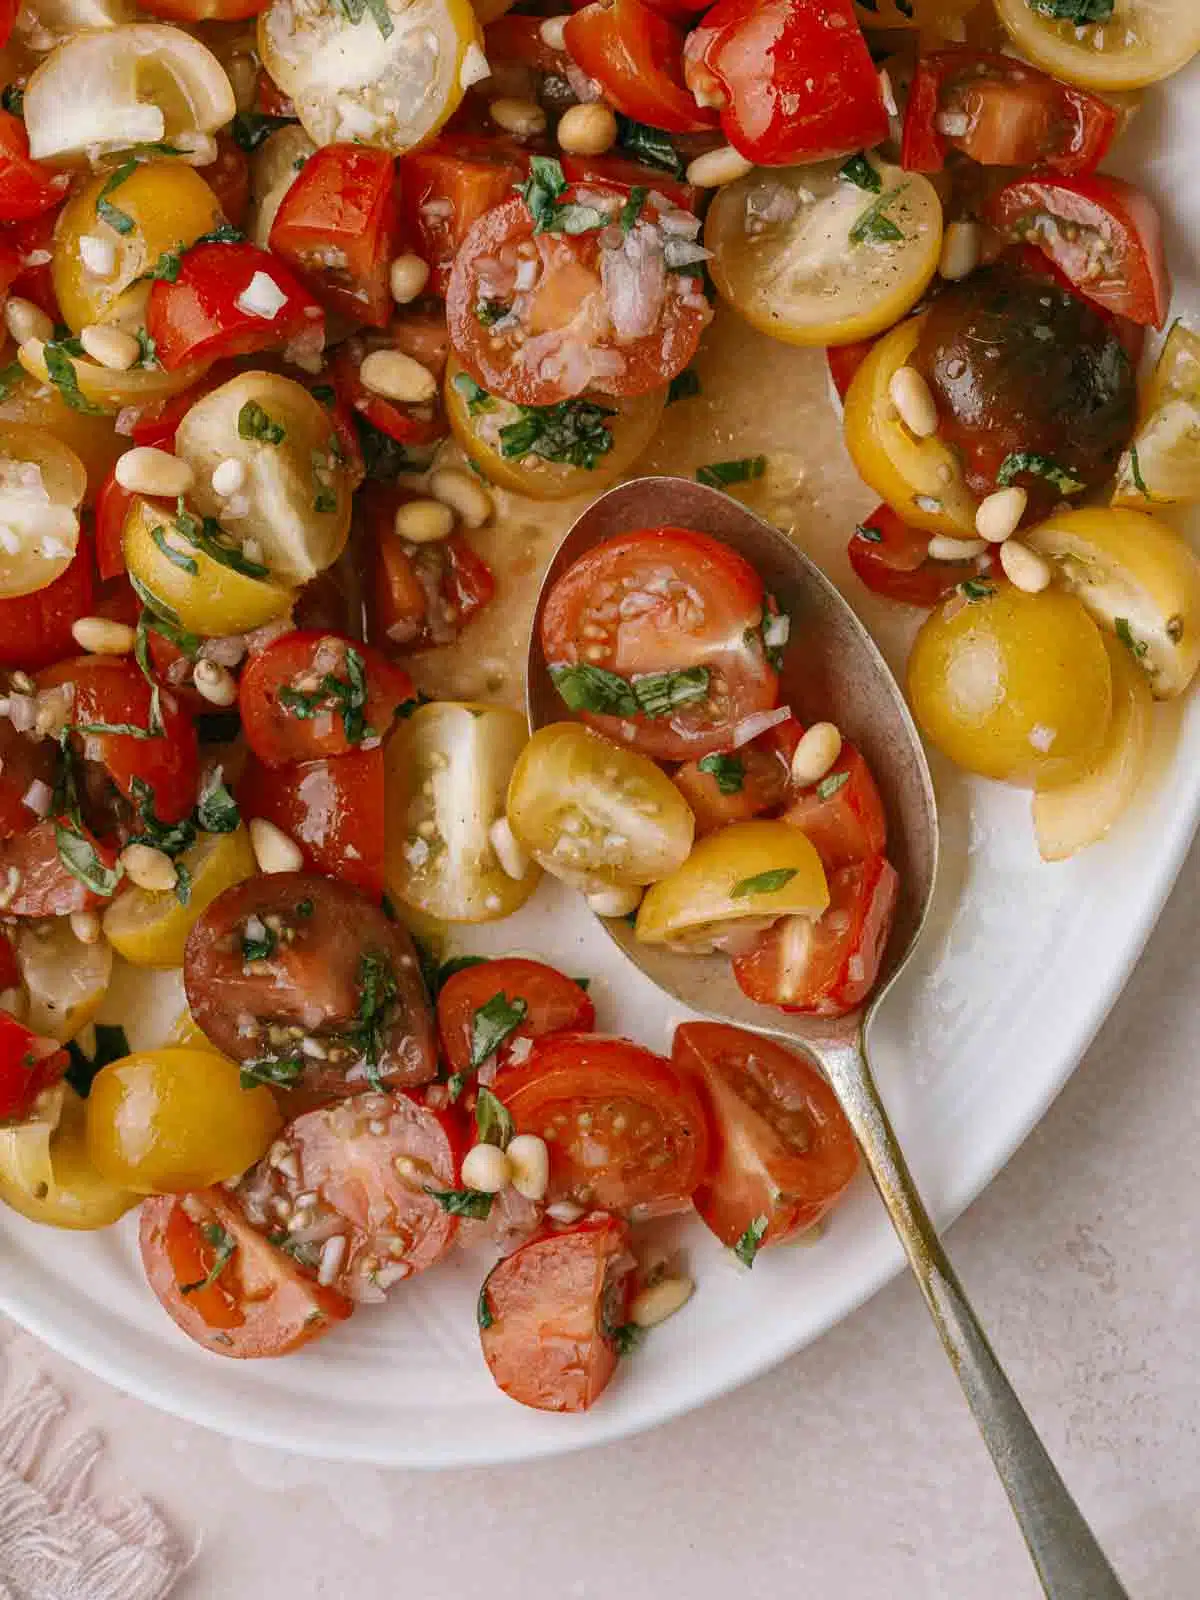 Tomato and onion salad on a plate close up.